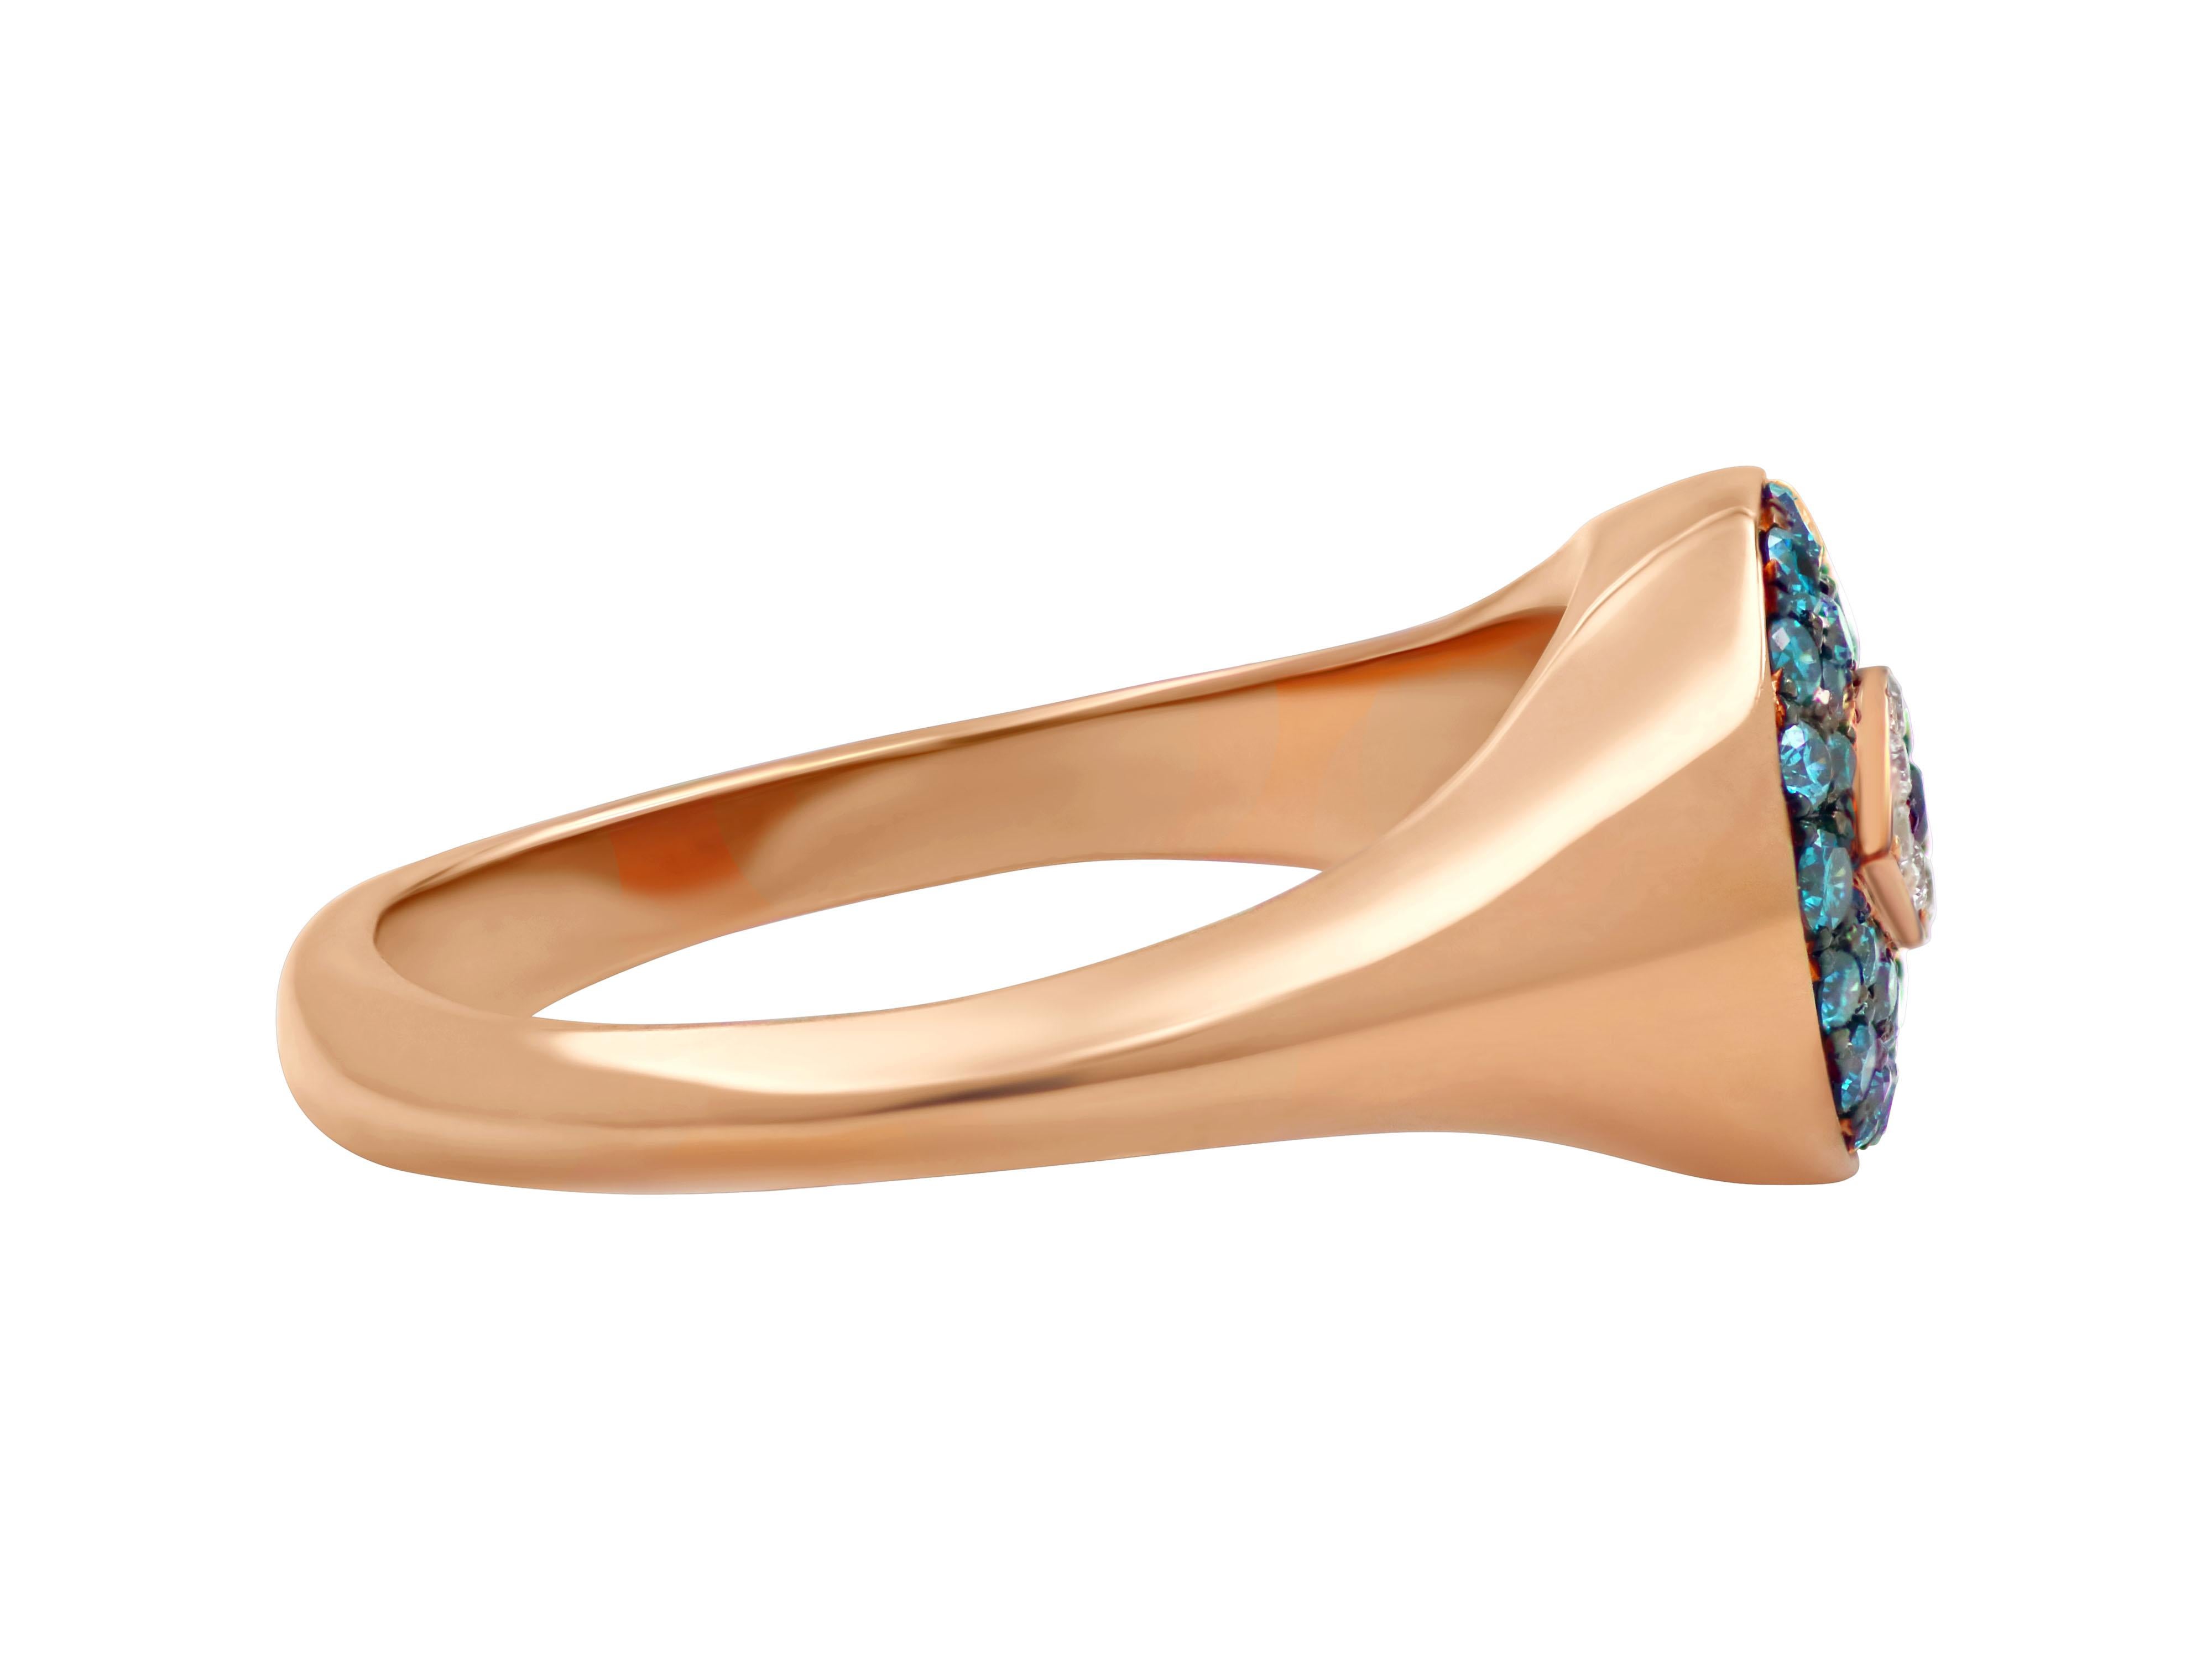 Evil eye ring set in 18k rose gold with 0.15 carats black diamond, 0.26 carats blue diamonds and 0.05 brilliant cut white diamonds. 

Ring face: 0.354X0.354